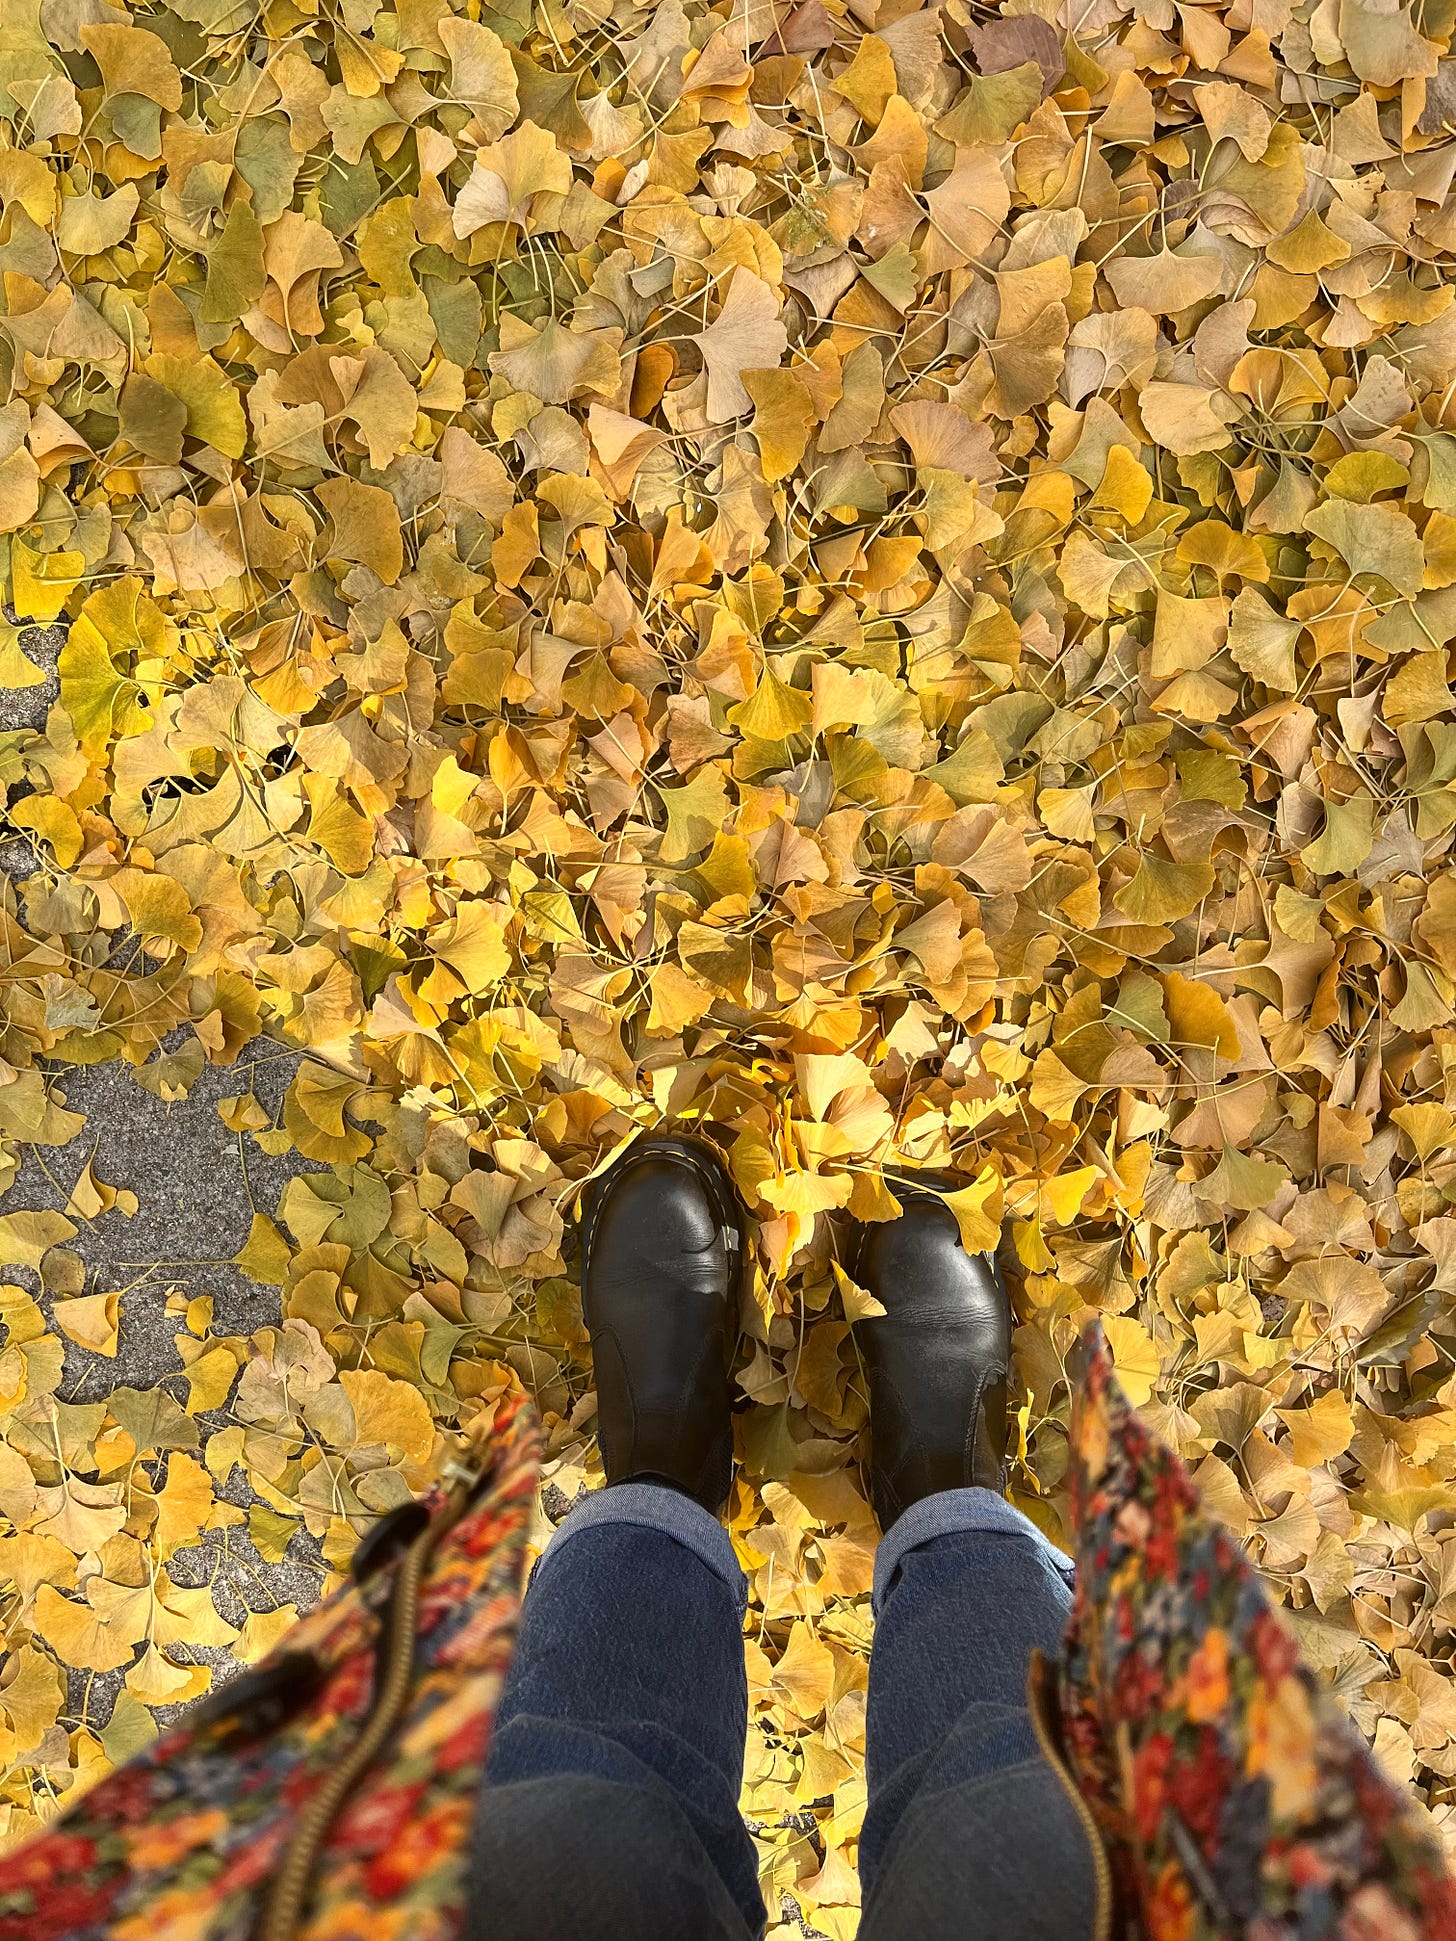 Looking down at my Docs in a pile of yellow gingko leaves